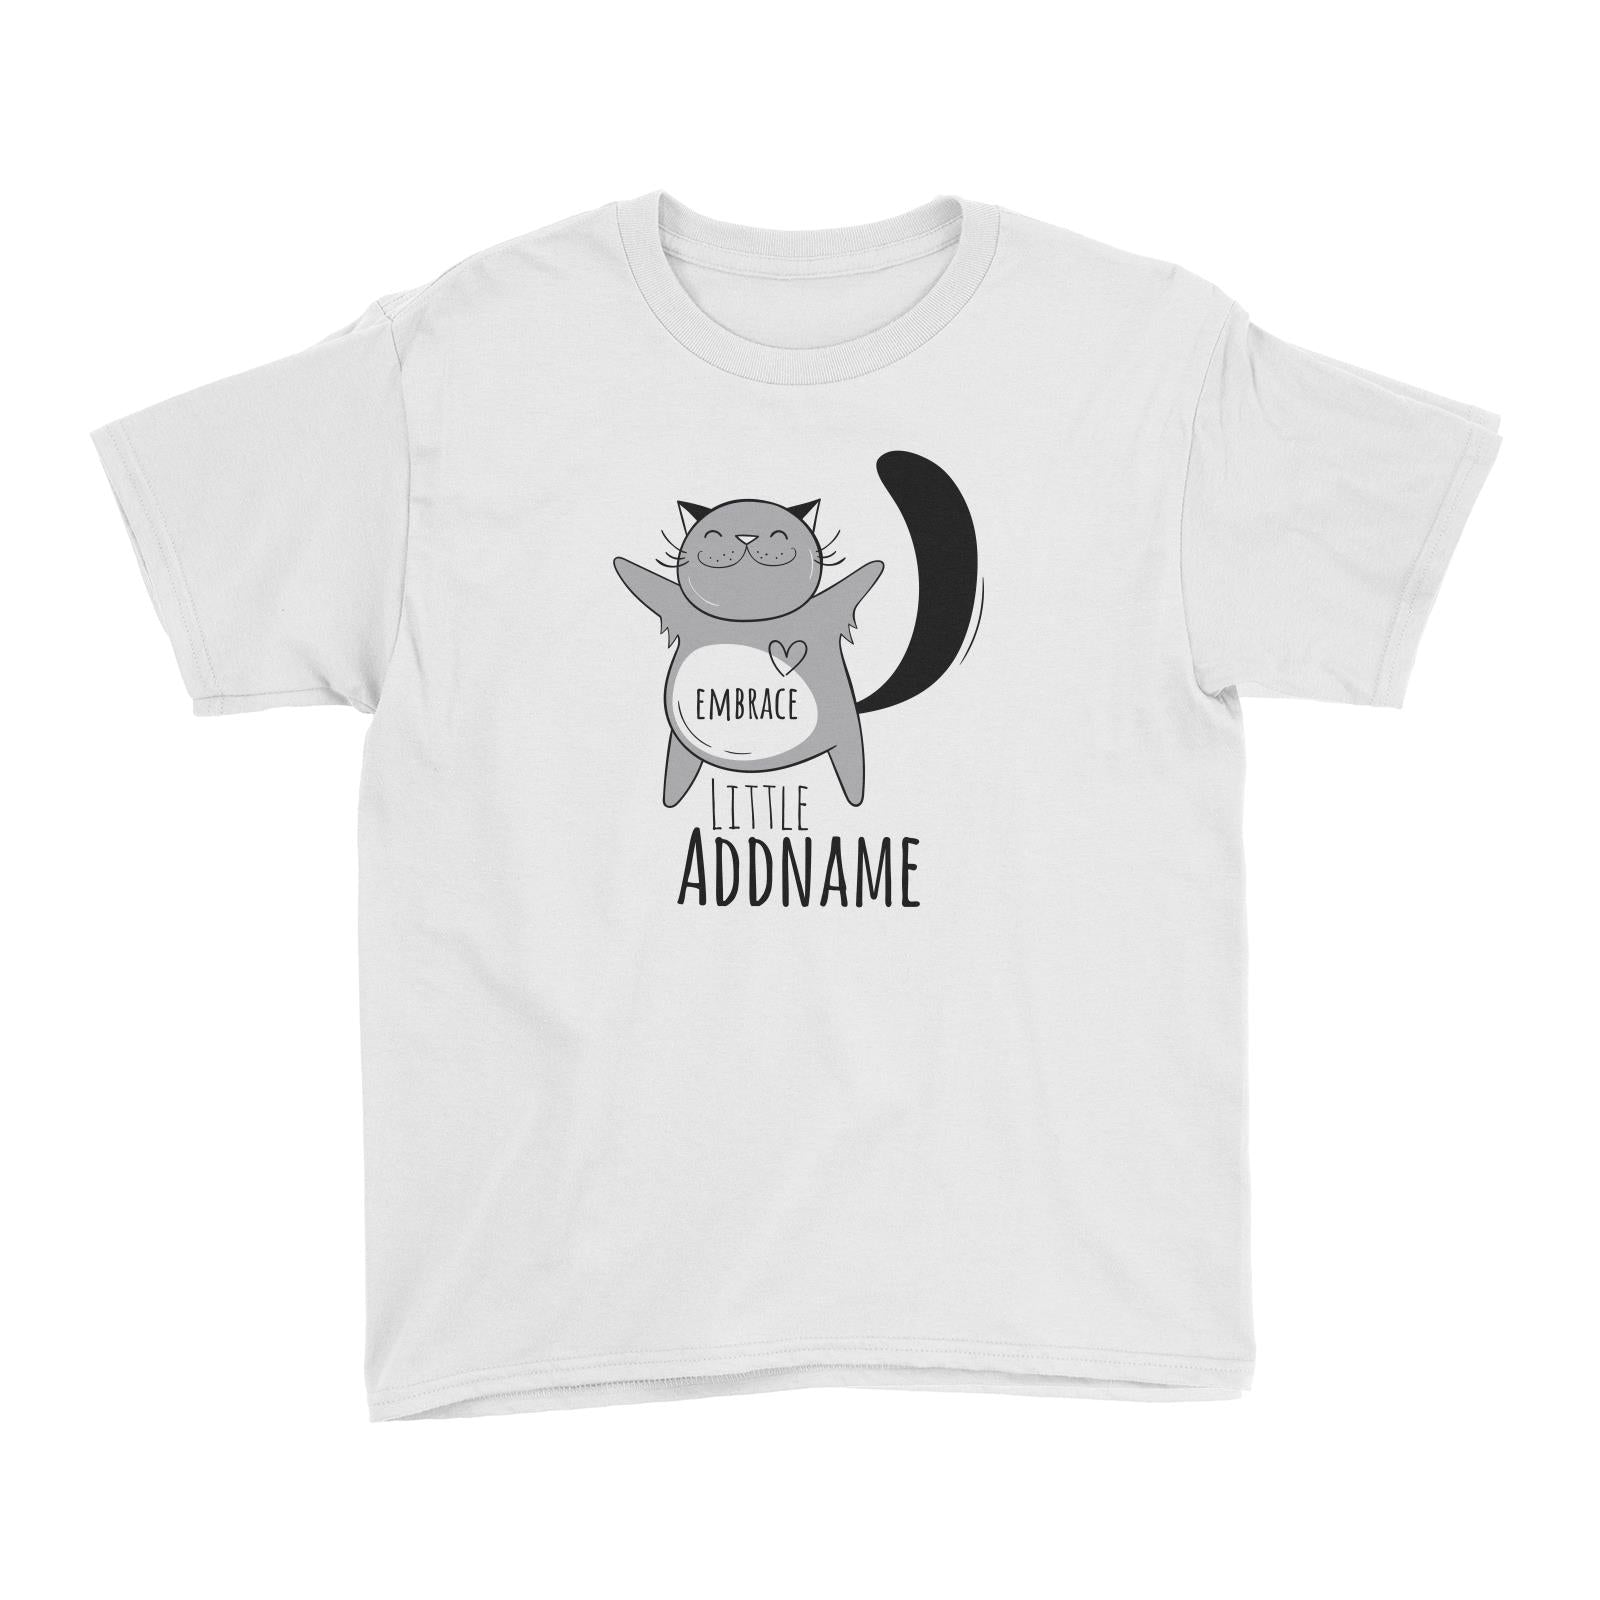 Drawn Adorable Animals Embrace Addname Kid's T-Shirt